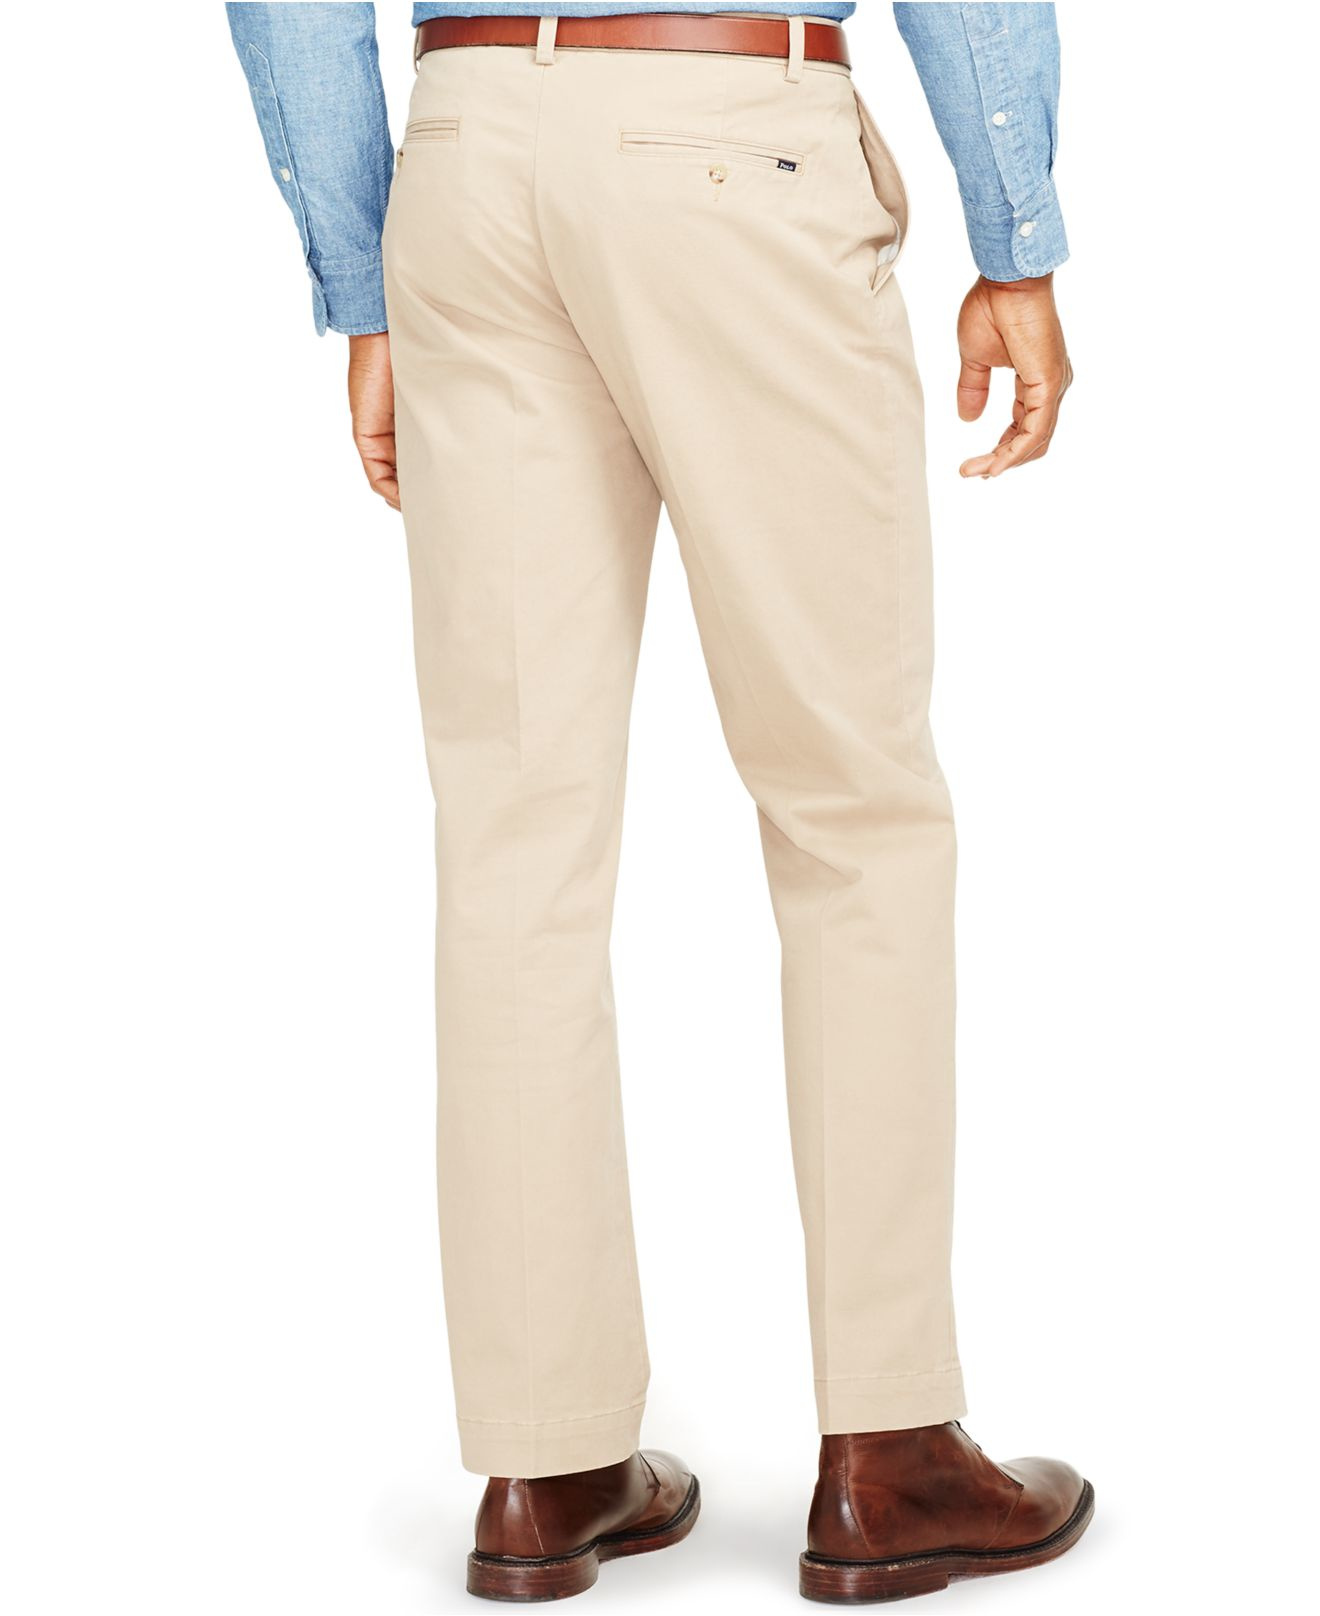 Polo Ralph Lauren Prepster Classic Fit Chino Pant – Garlan's, Inc.